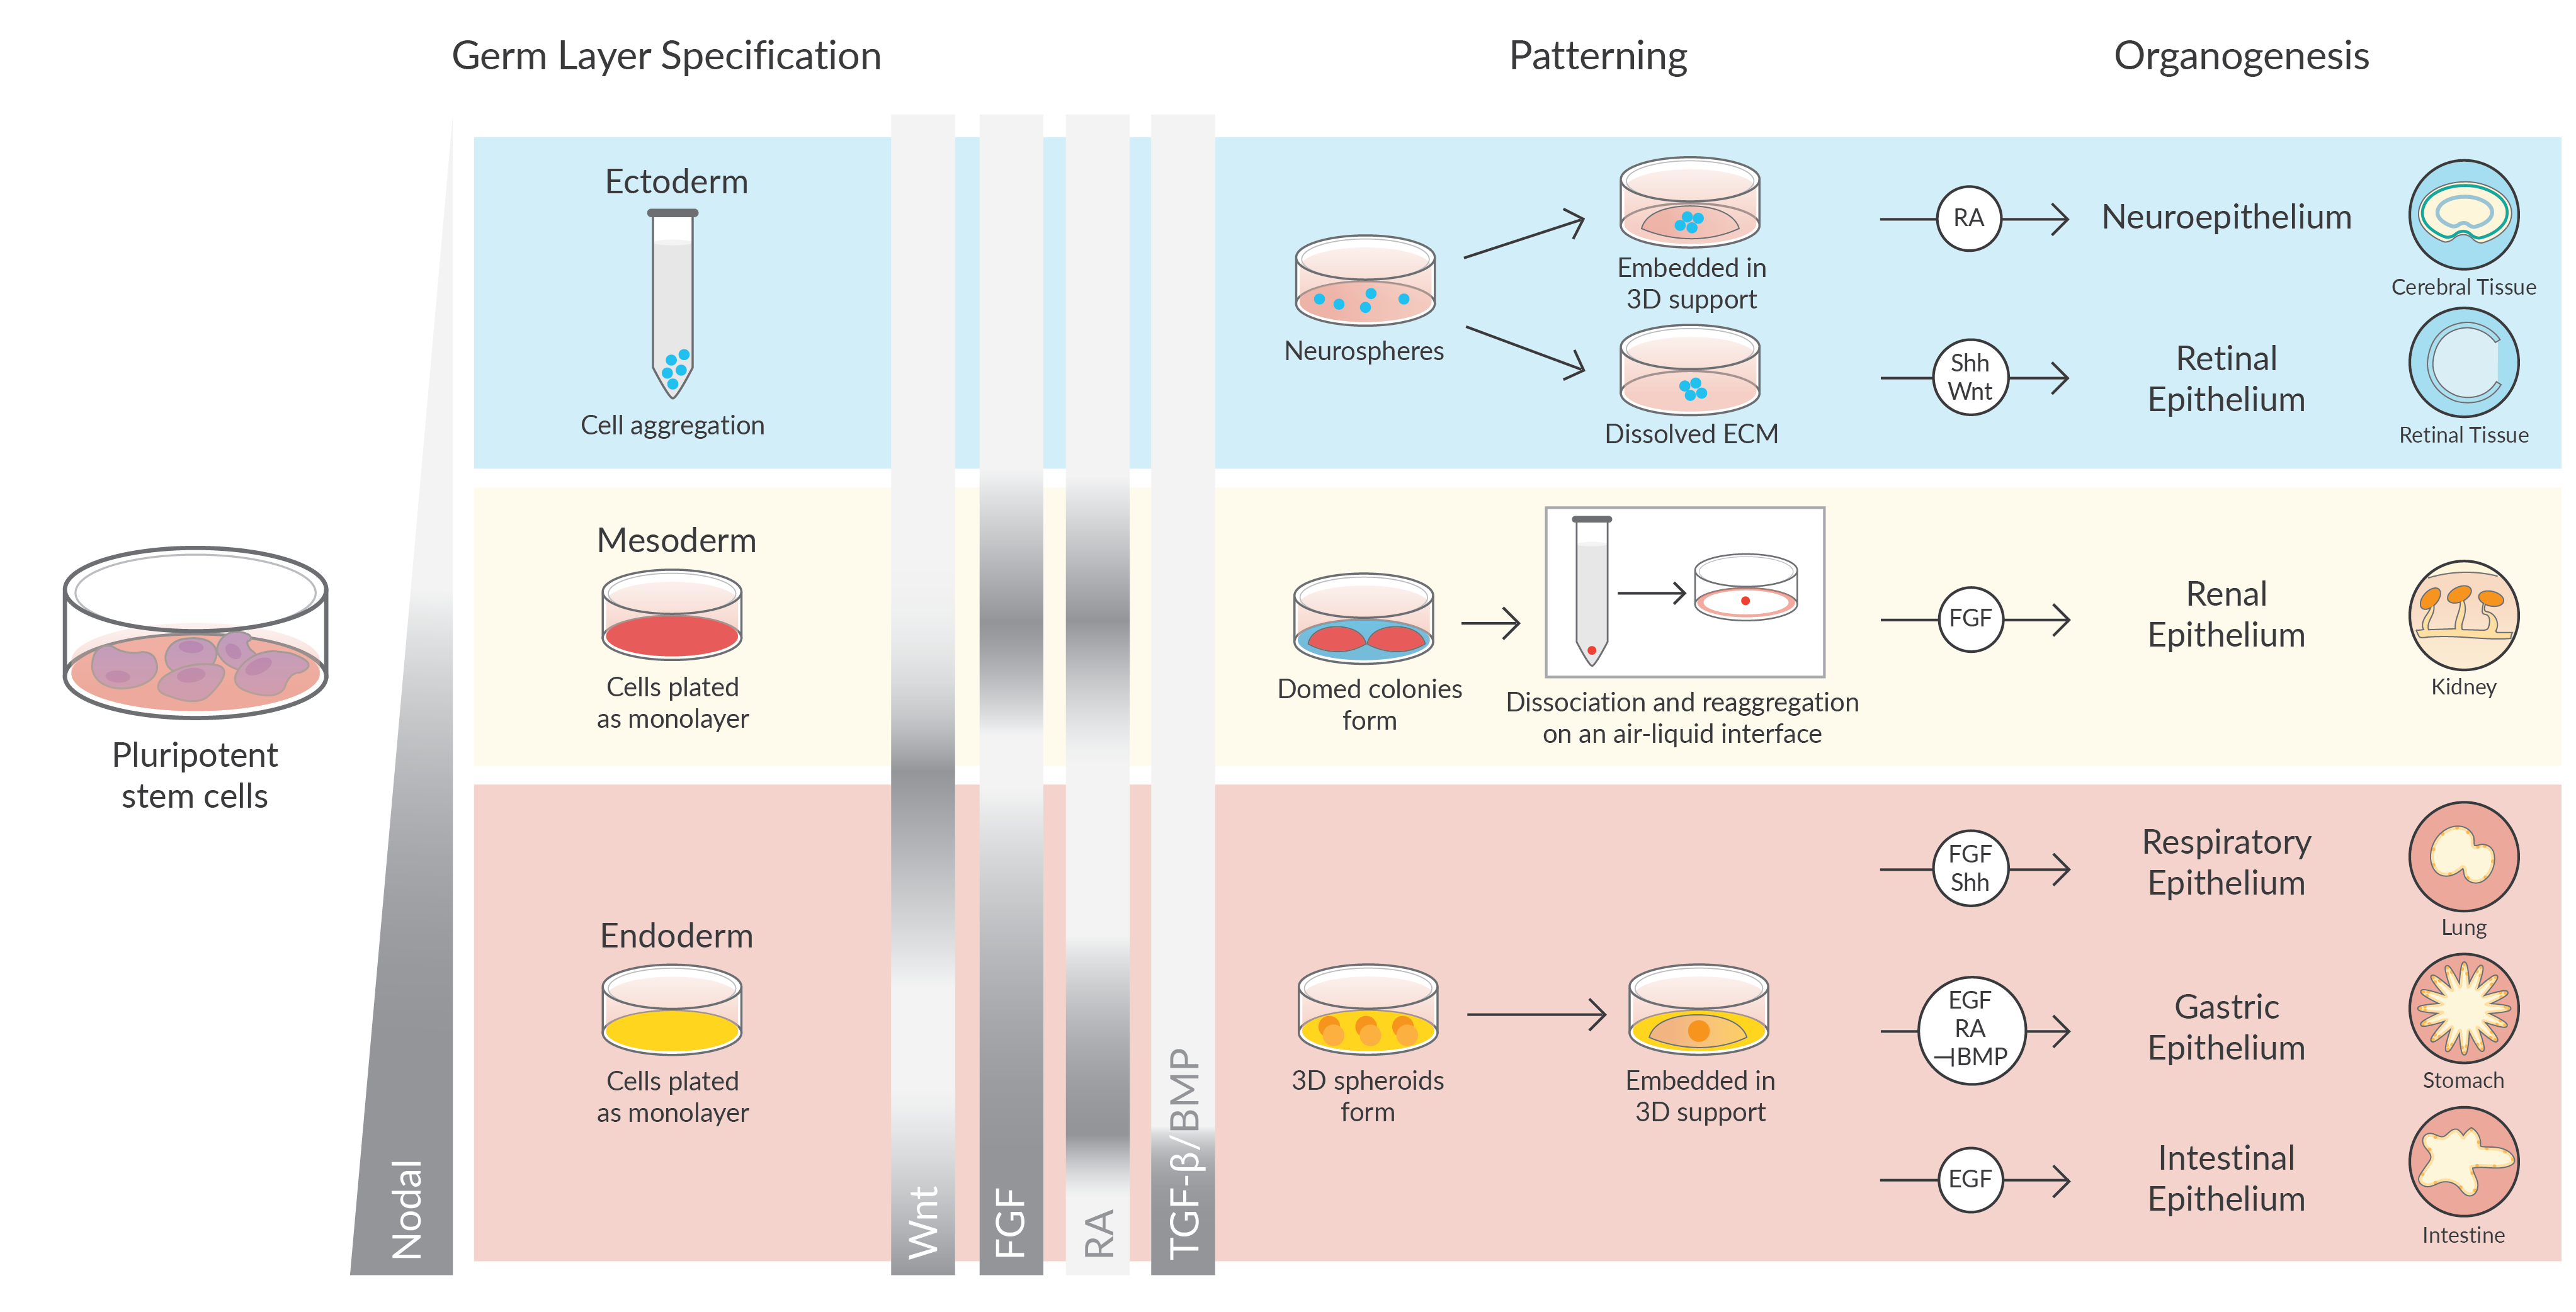 Germ layer specification, patterning, and organoid development 